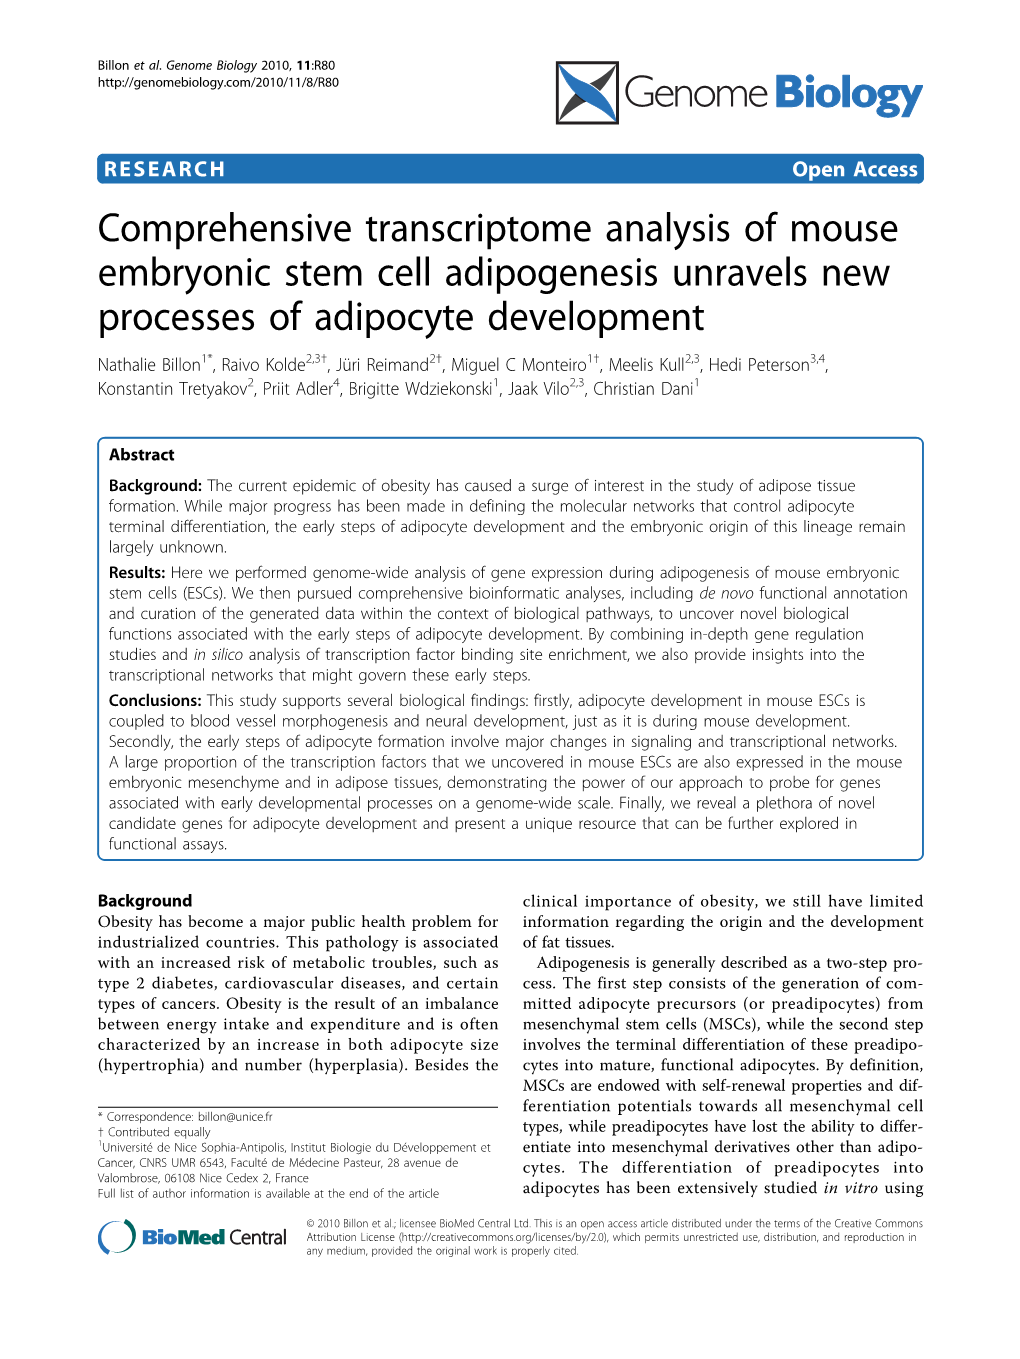 Comprehensive Transcriptome Analysis of Mouse Embryonic Stem Cell Adipogenesis Unravels New Processes of Adipocyte Development